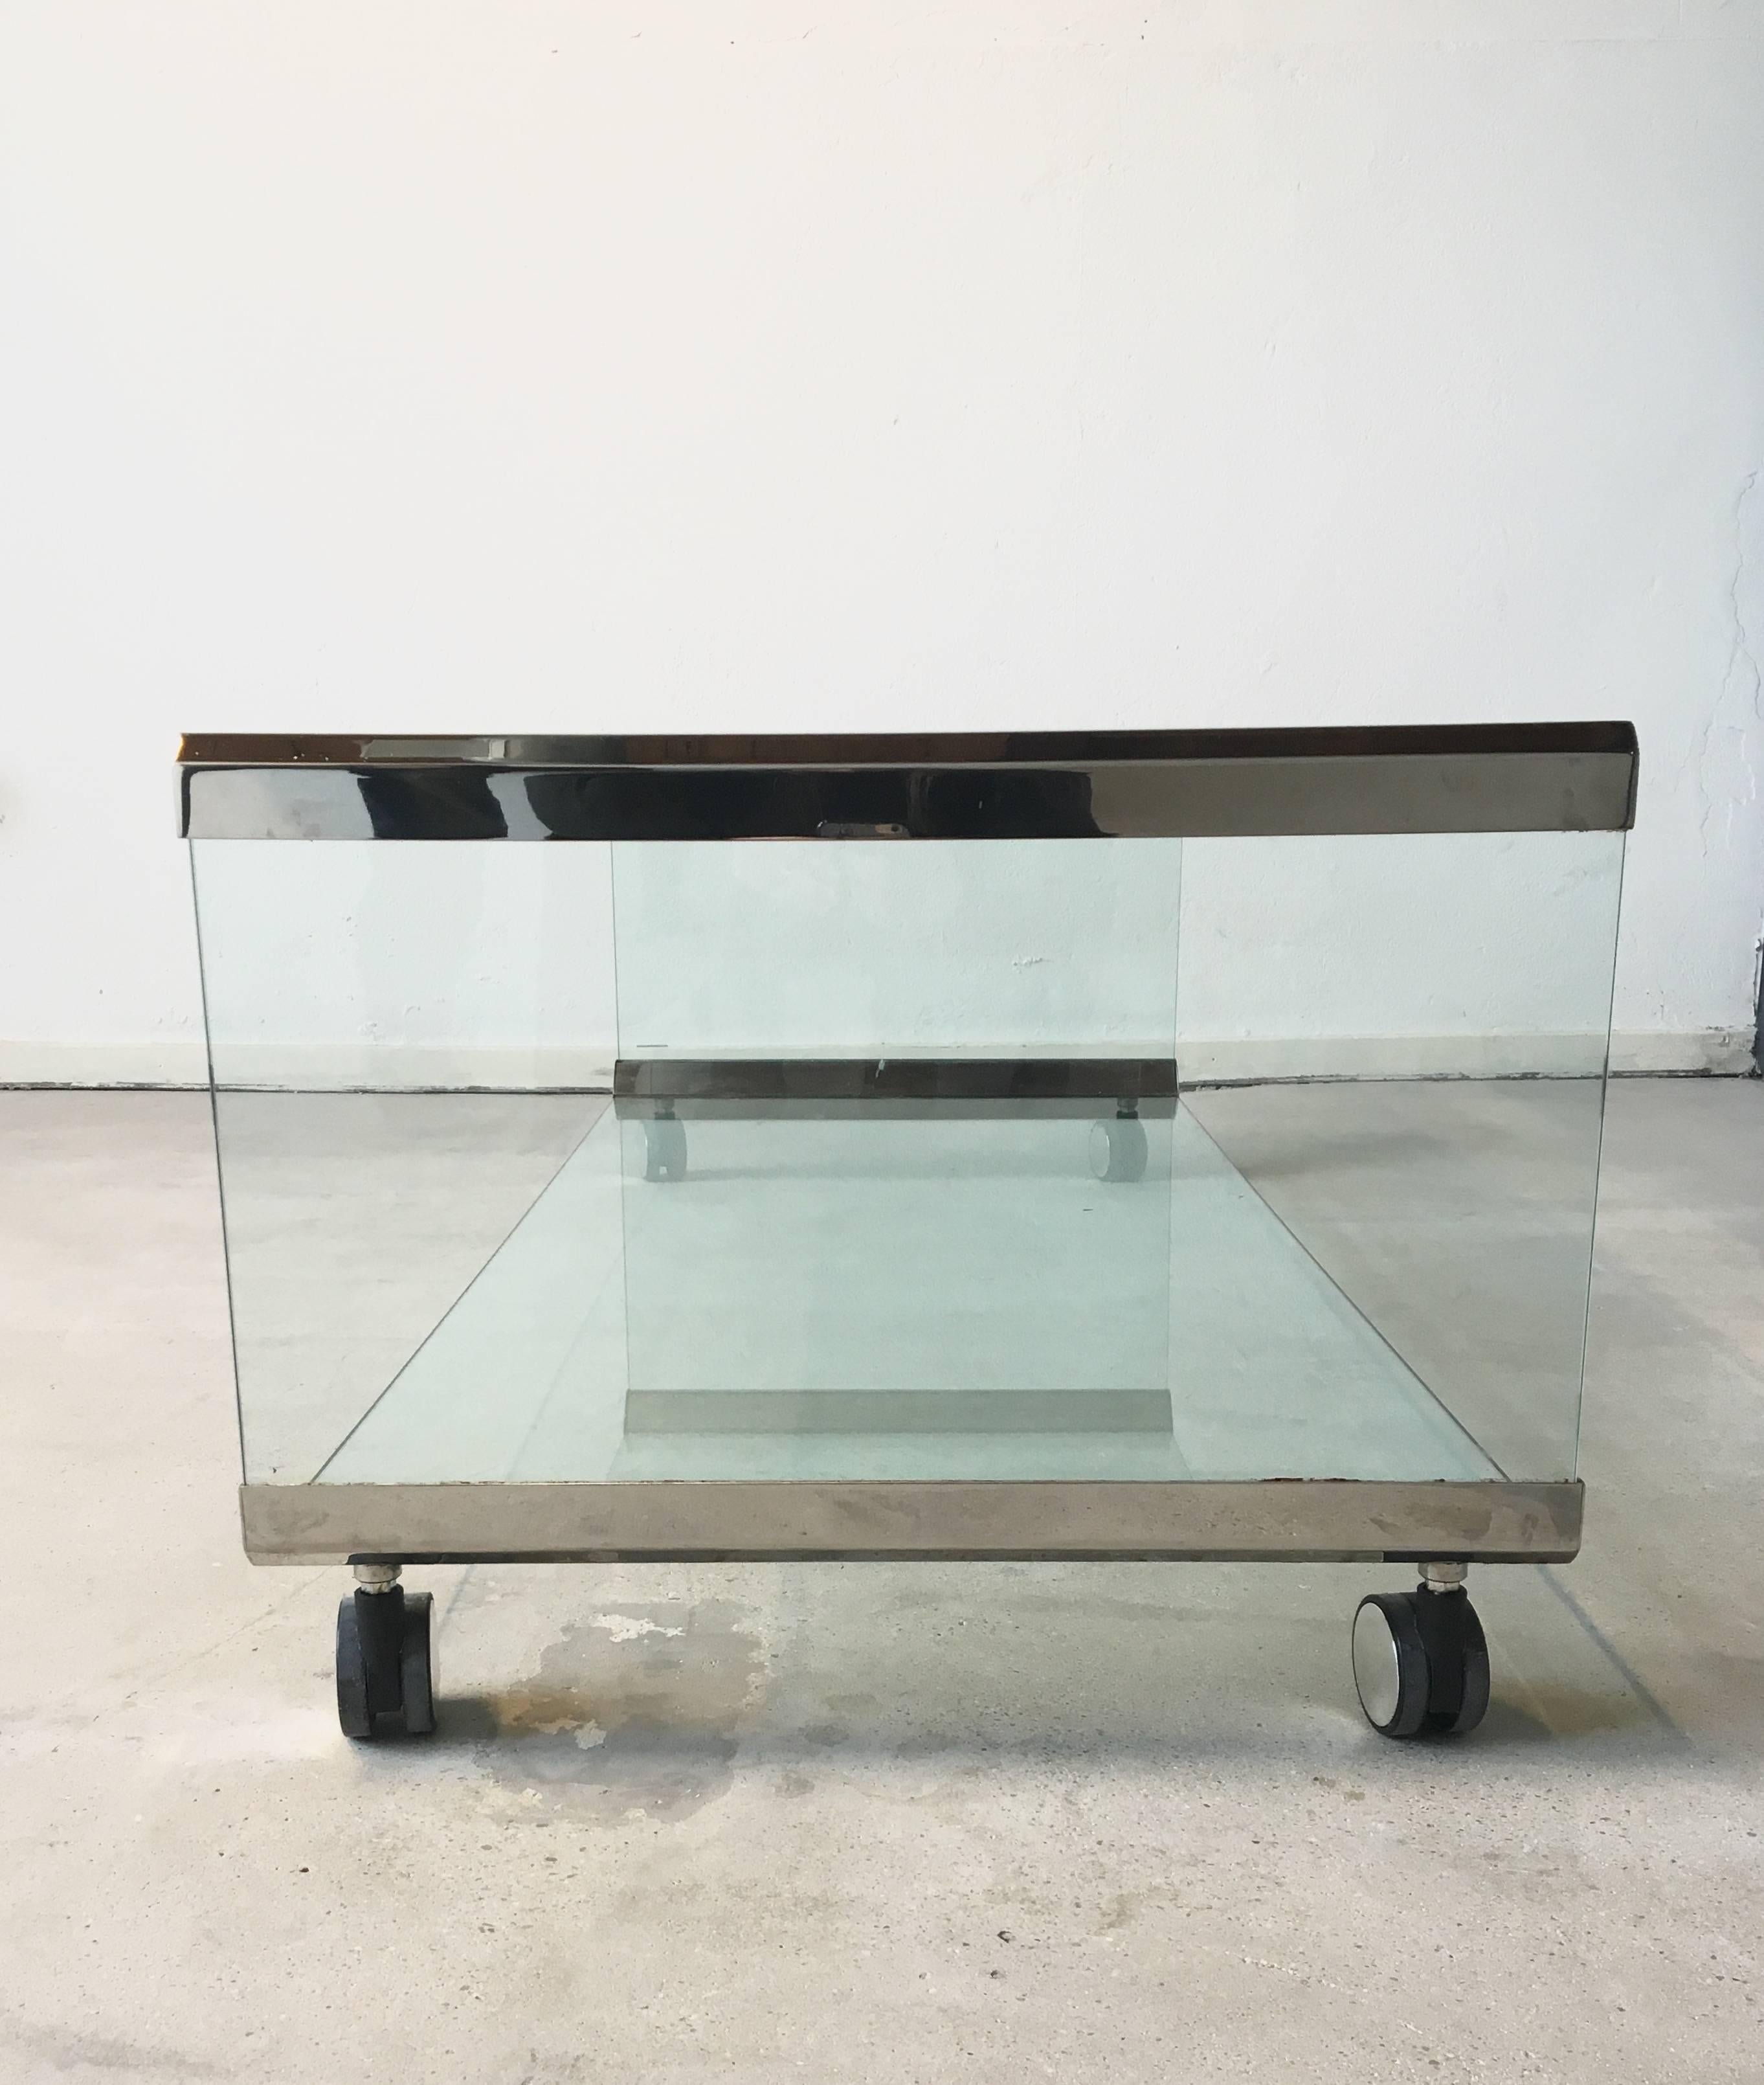 Hollywood Regency Chrome and Glass Coffee Table, by Pierangelo Galotti for Galotti & Radice, 1975 For Sale